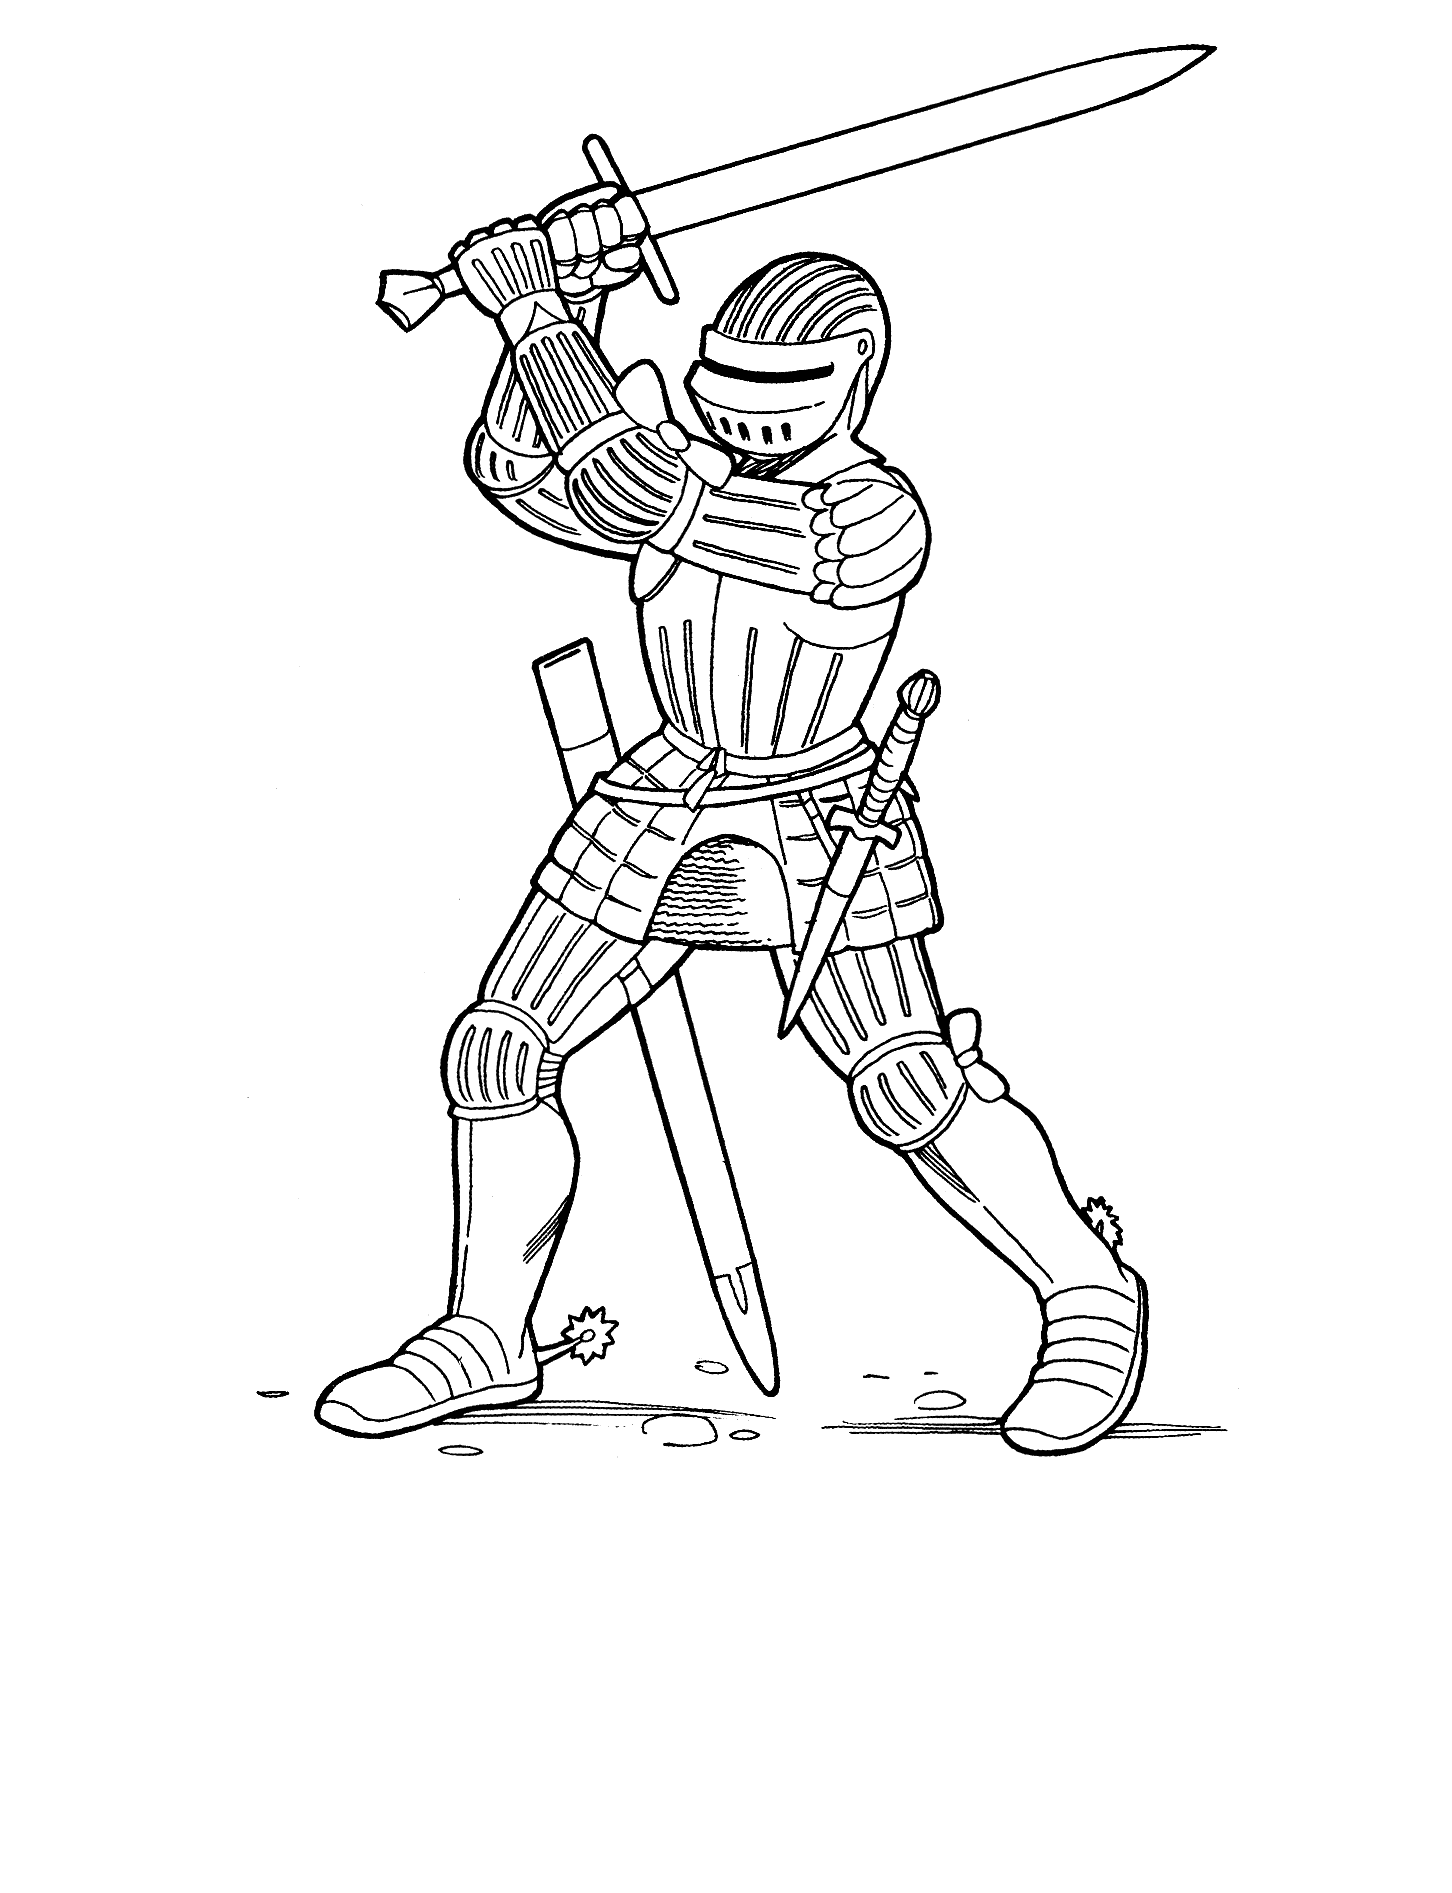 Soldiers and knights coloring pages 7 / Soldiers and Knights ...